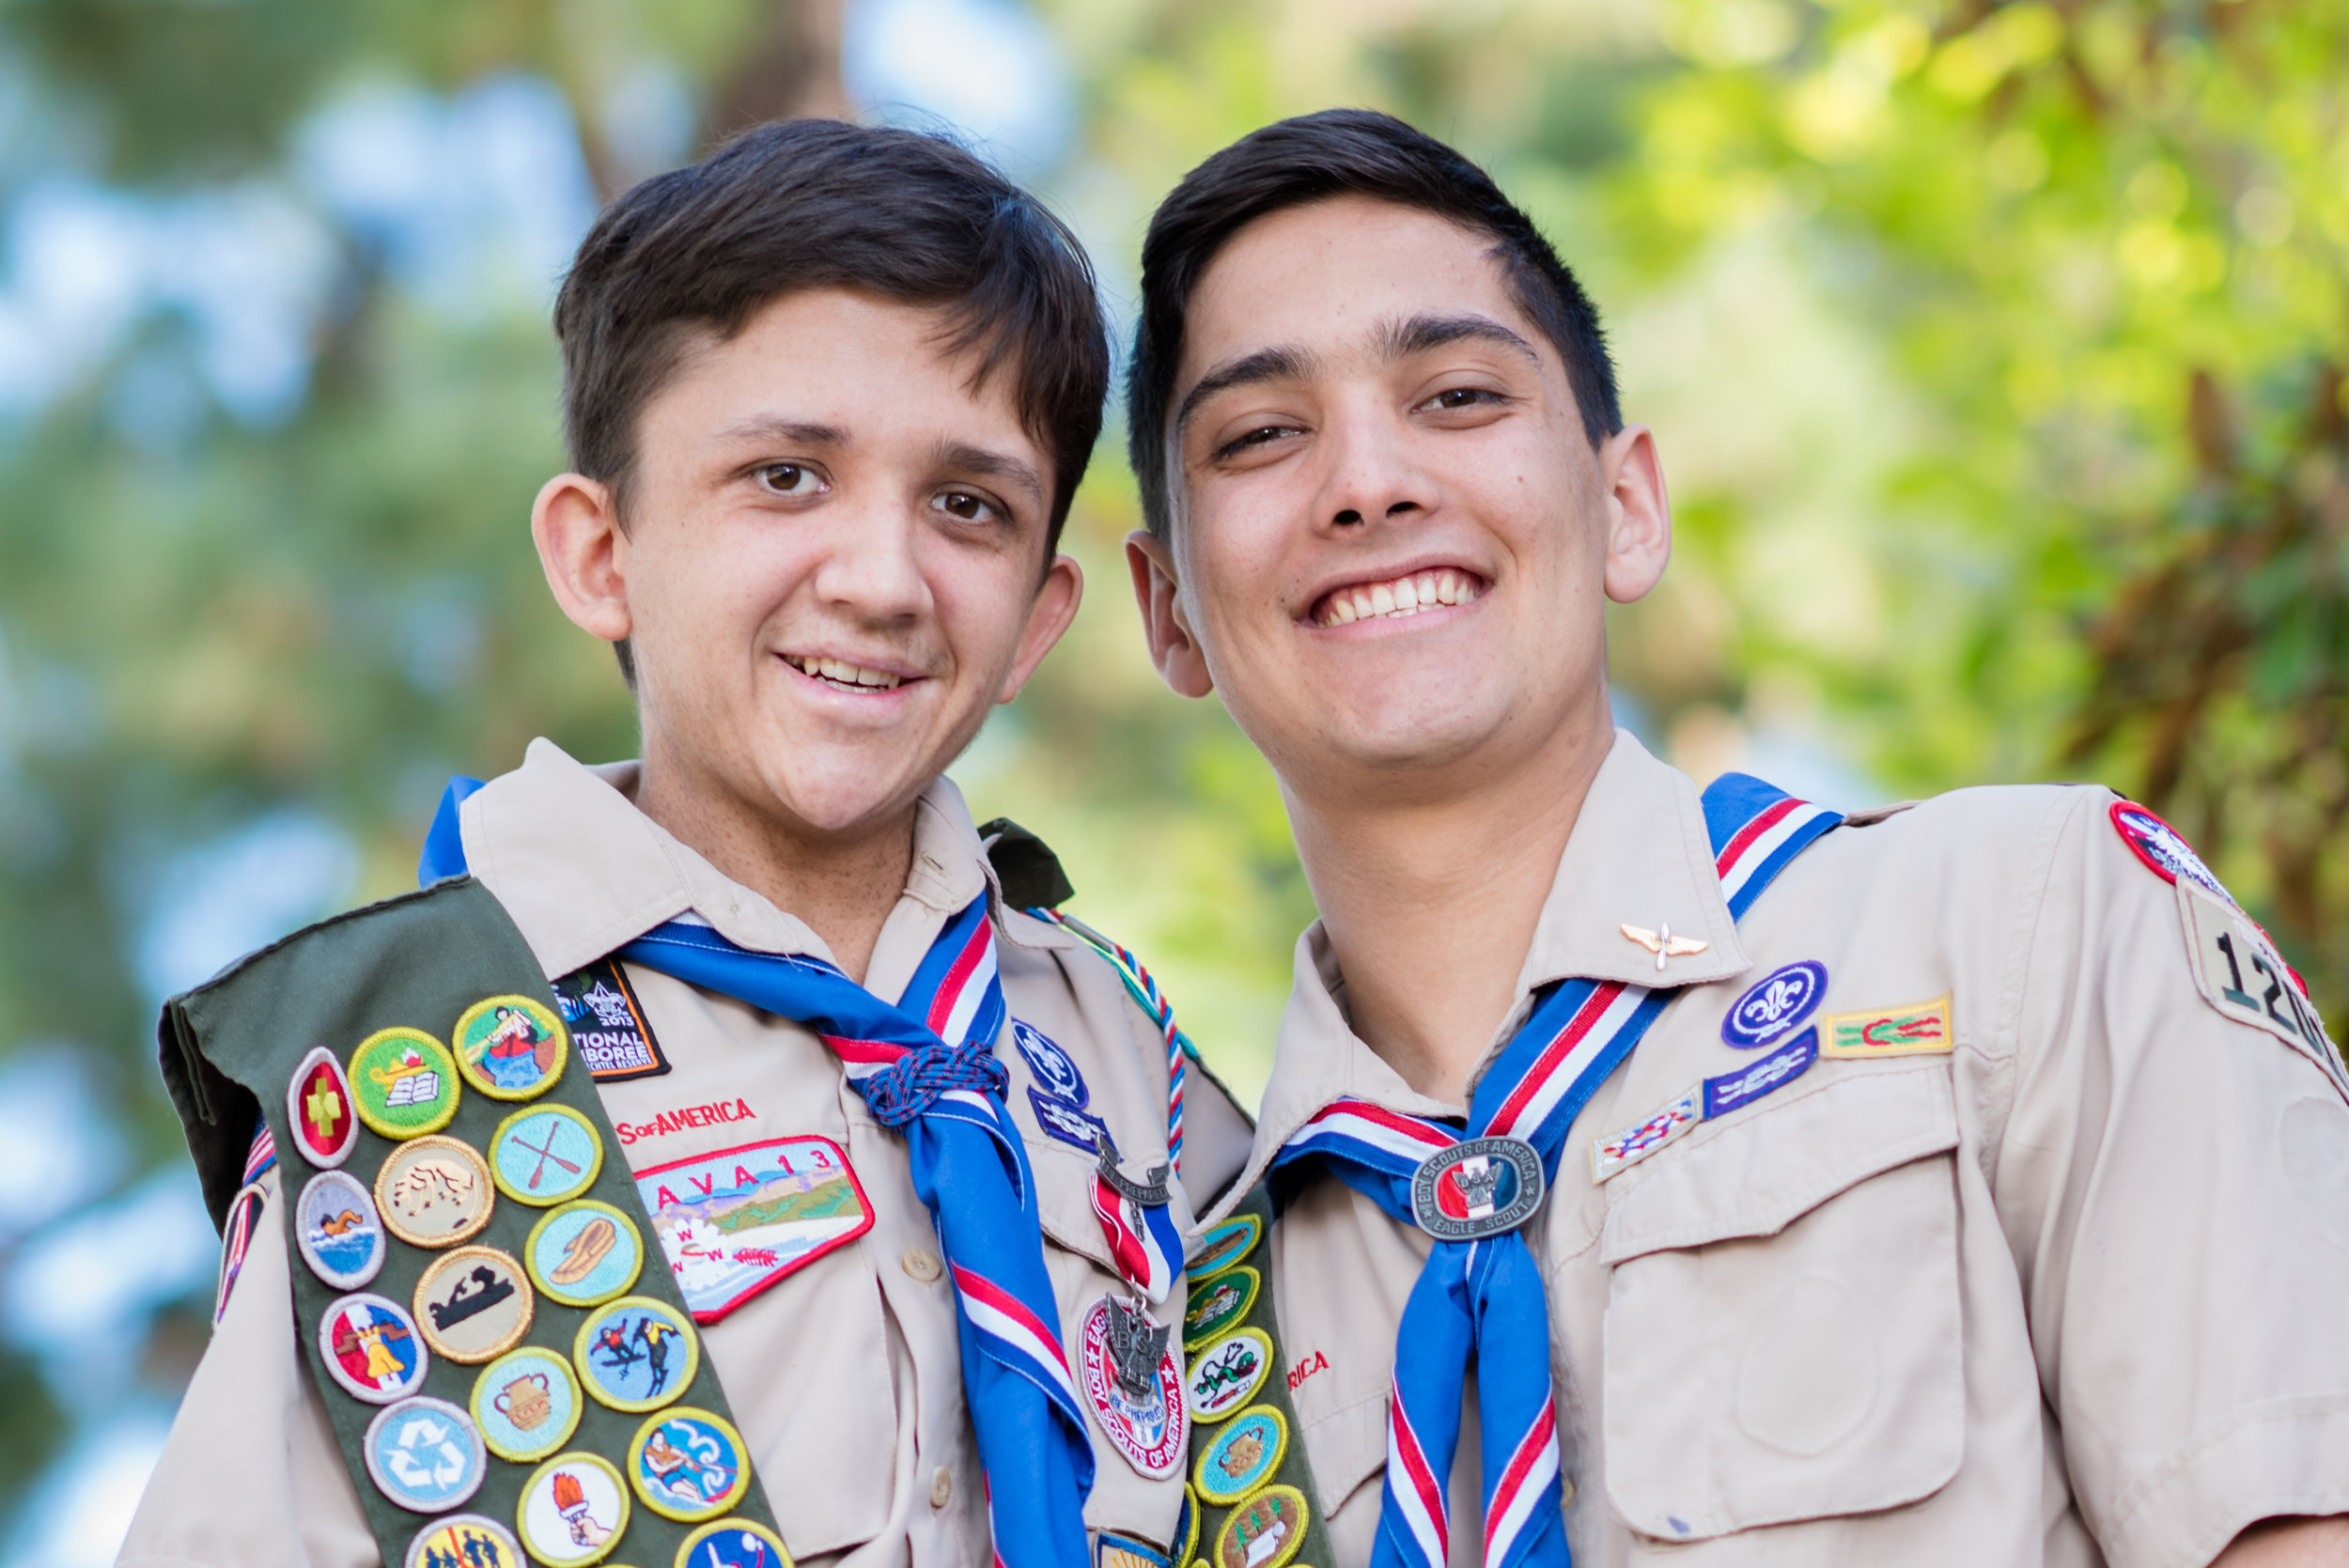 212_2016_March_19-eagle_scout_ceremony_fullerton_1-17915.jpg